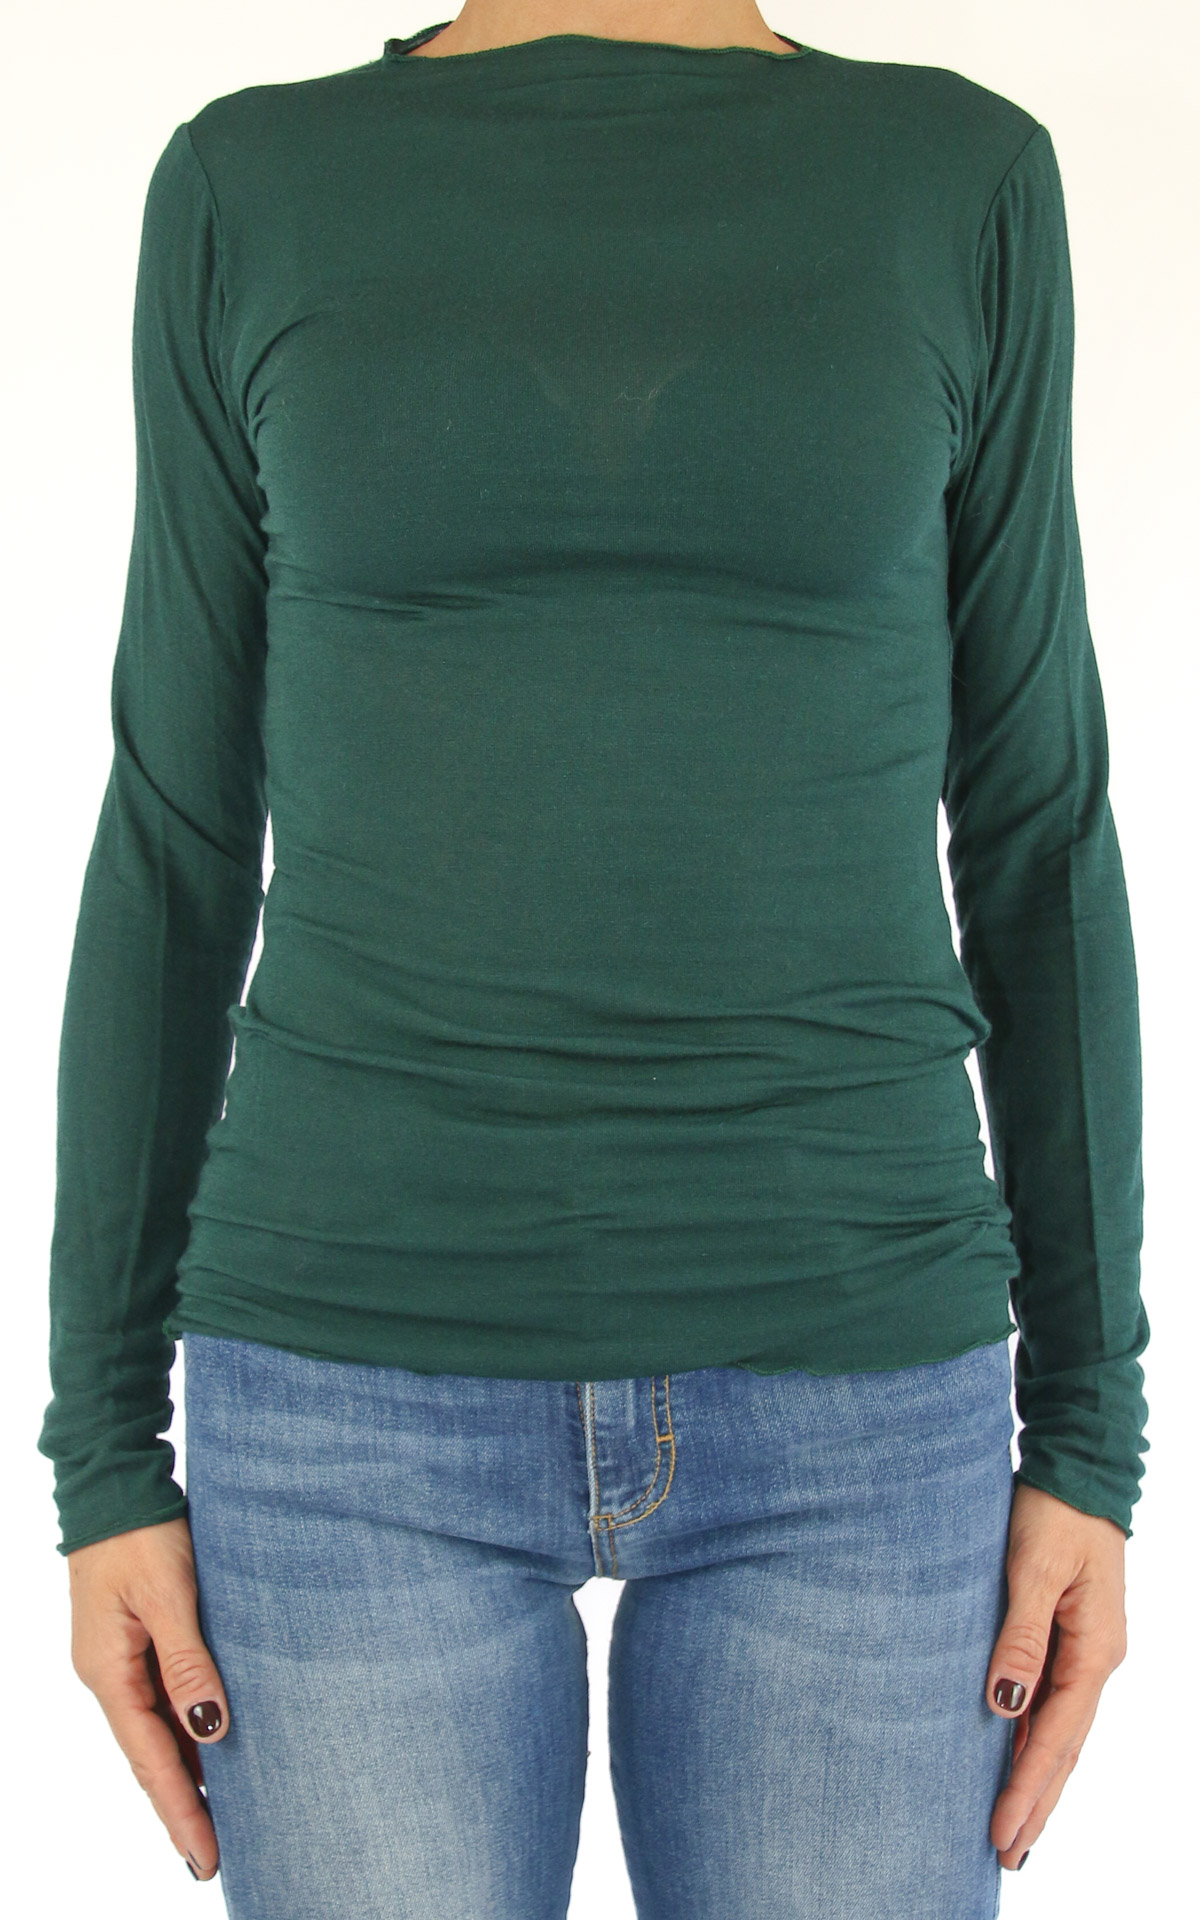 Off-On - t-shirt in cashmere - verde